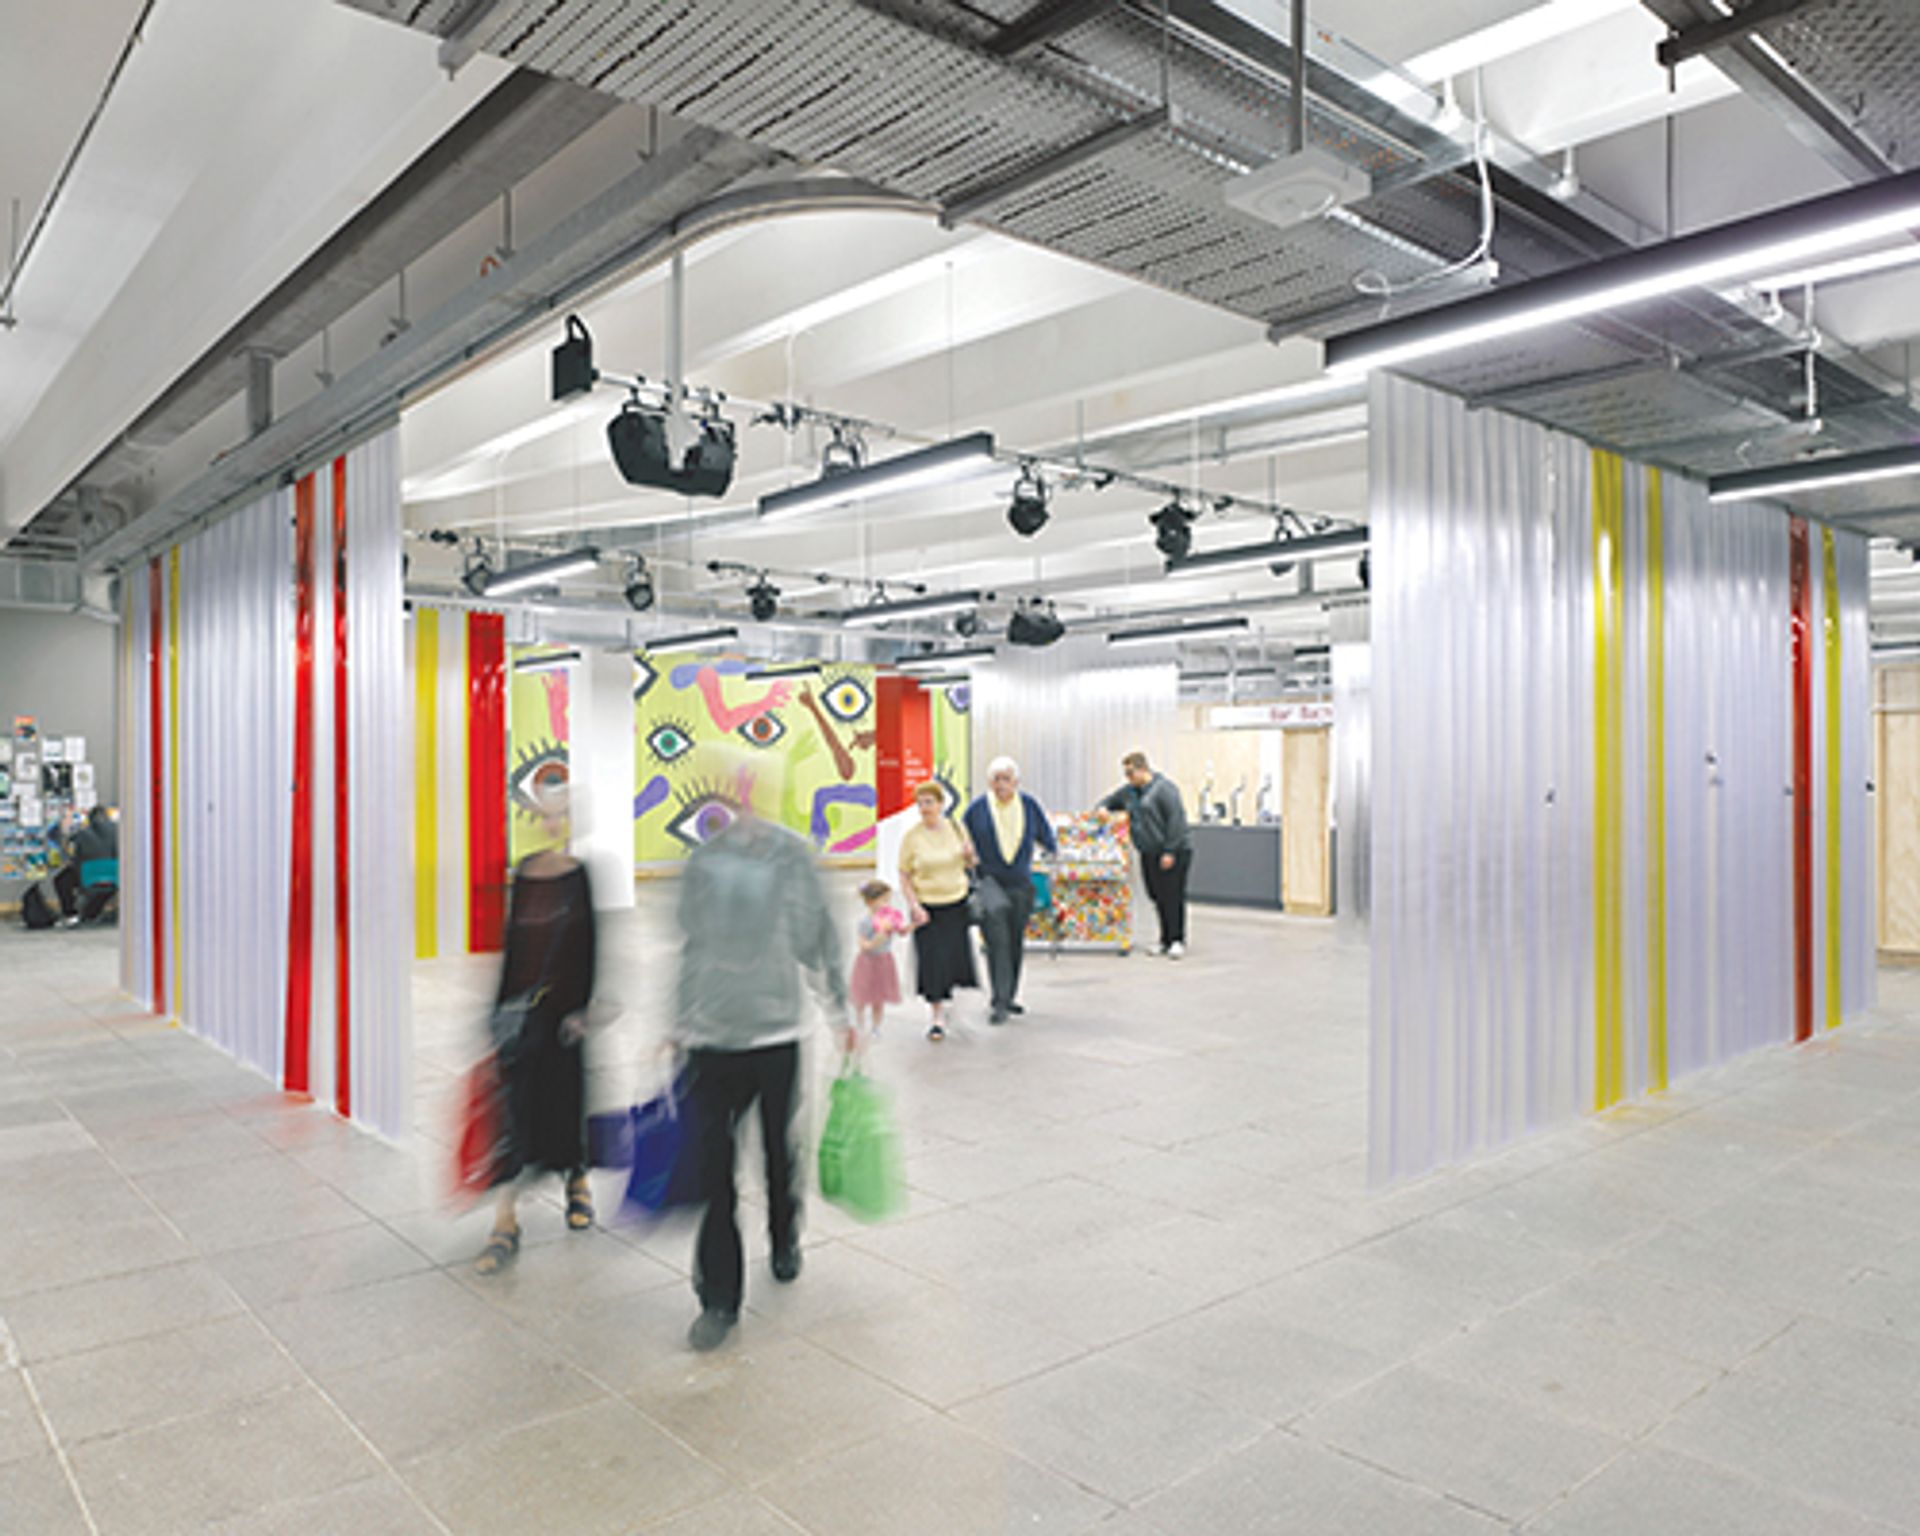 The internal public square uses a PVC curtain to create a more intimate space © James Morris